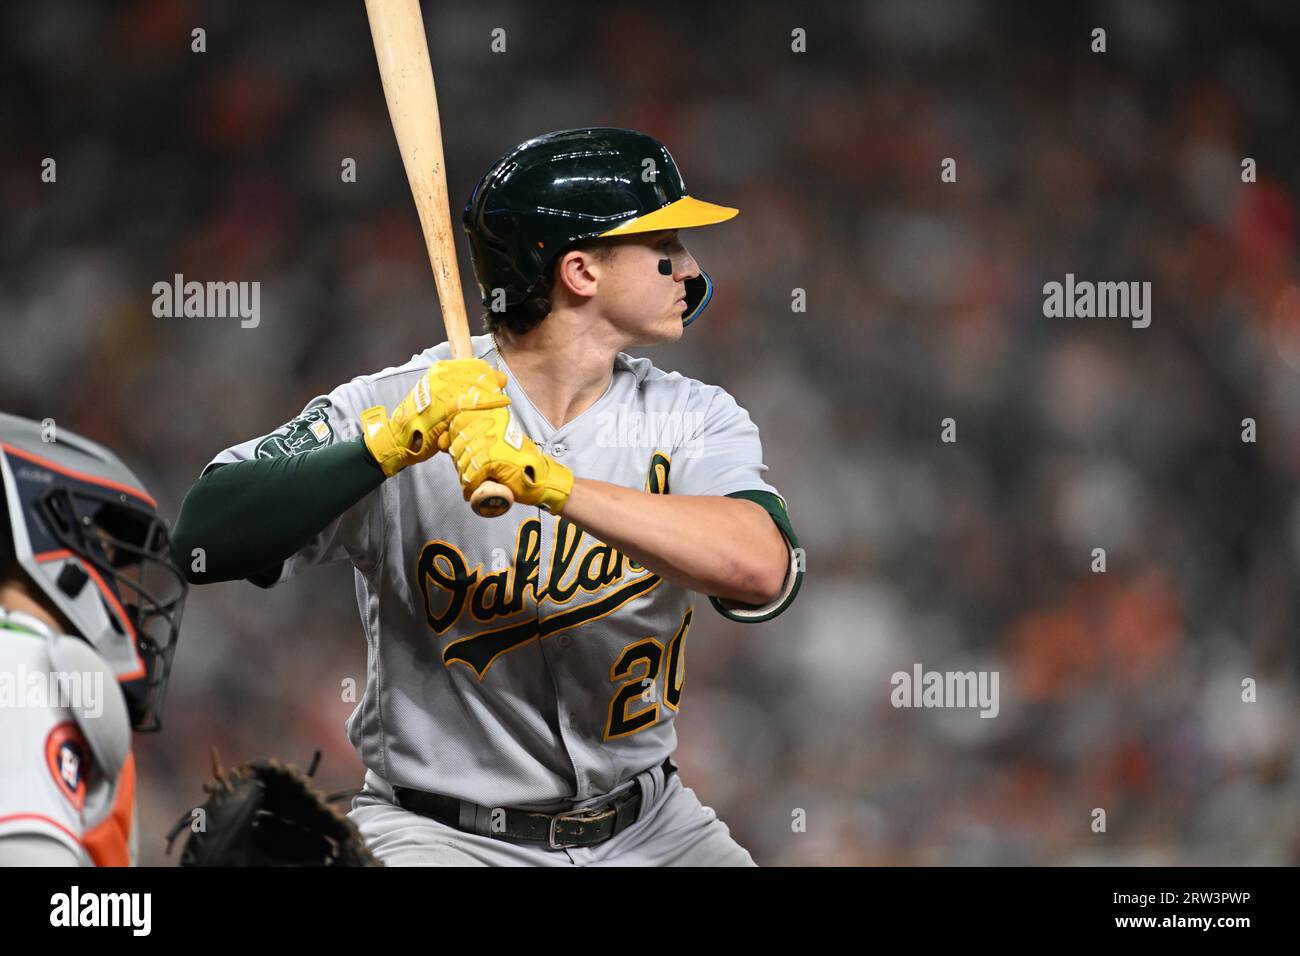 Oakland Athletics second baseman Zack Gelof (20) batting in the top of the fourth inning of the MLB game between the Oakland Athletics and the Houston Stock Photo